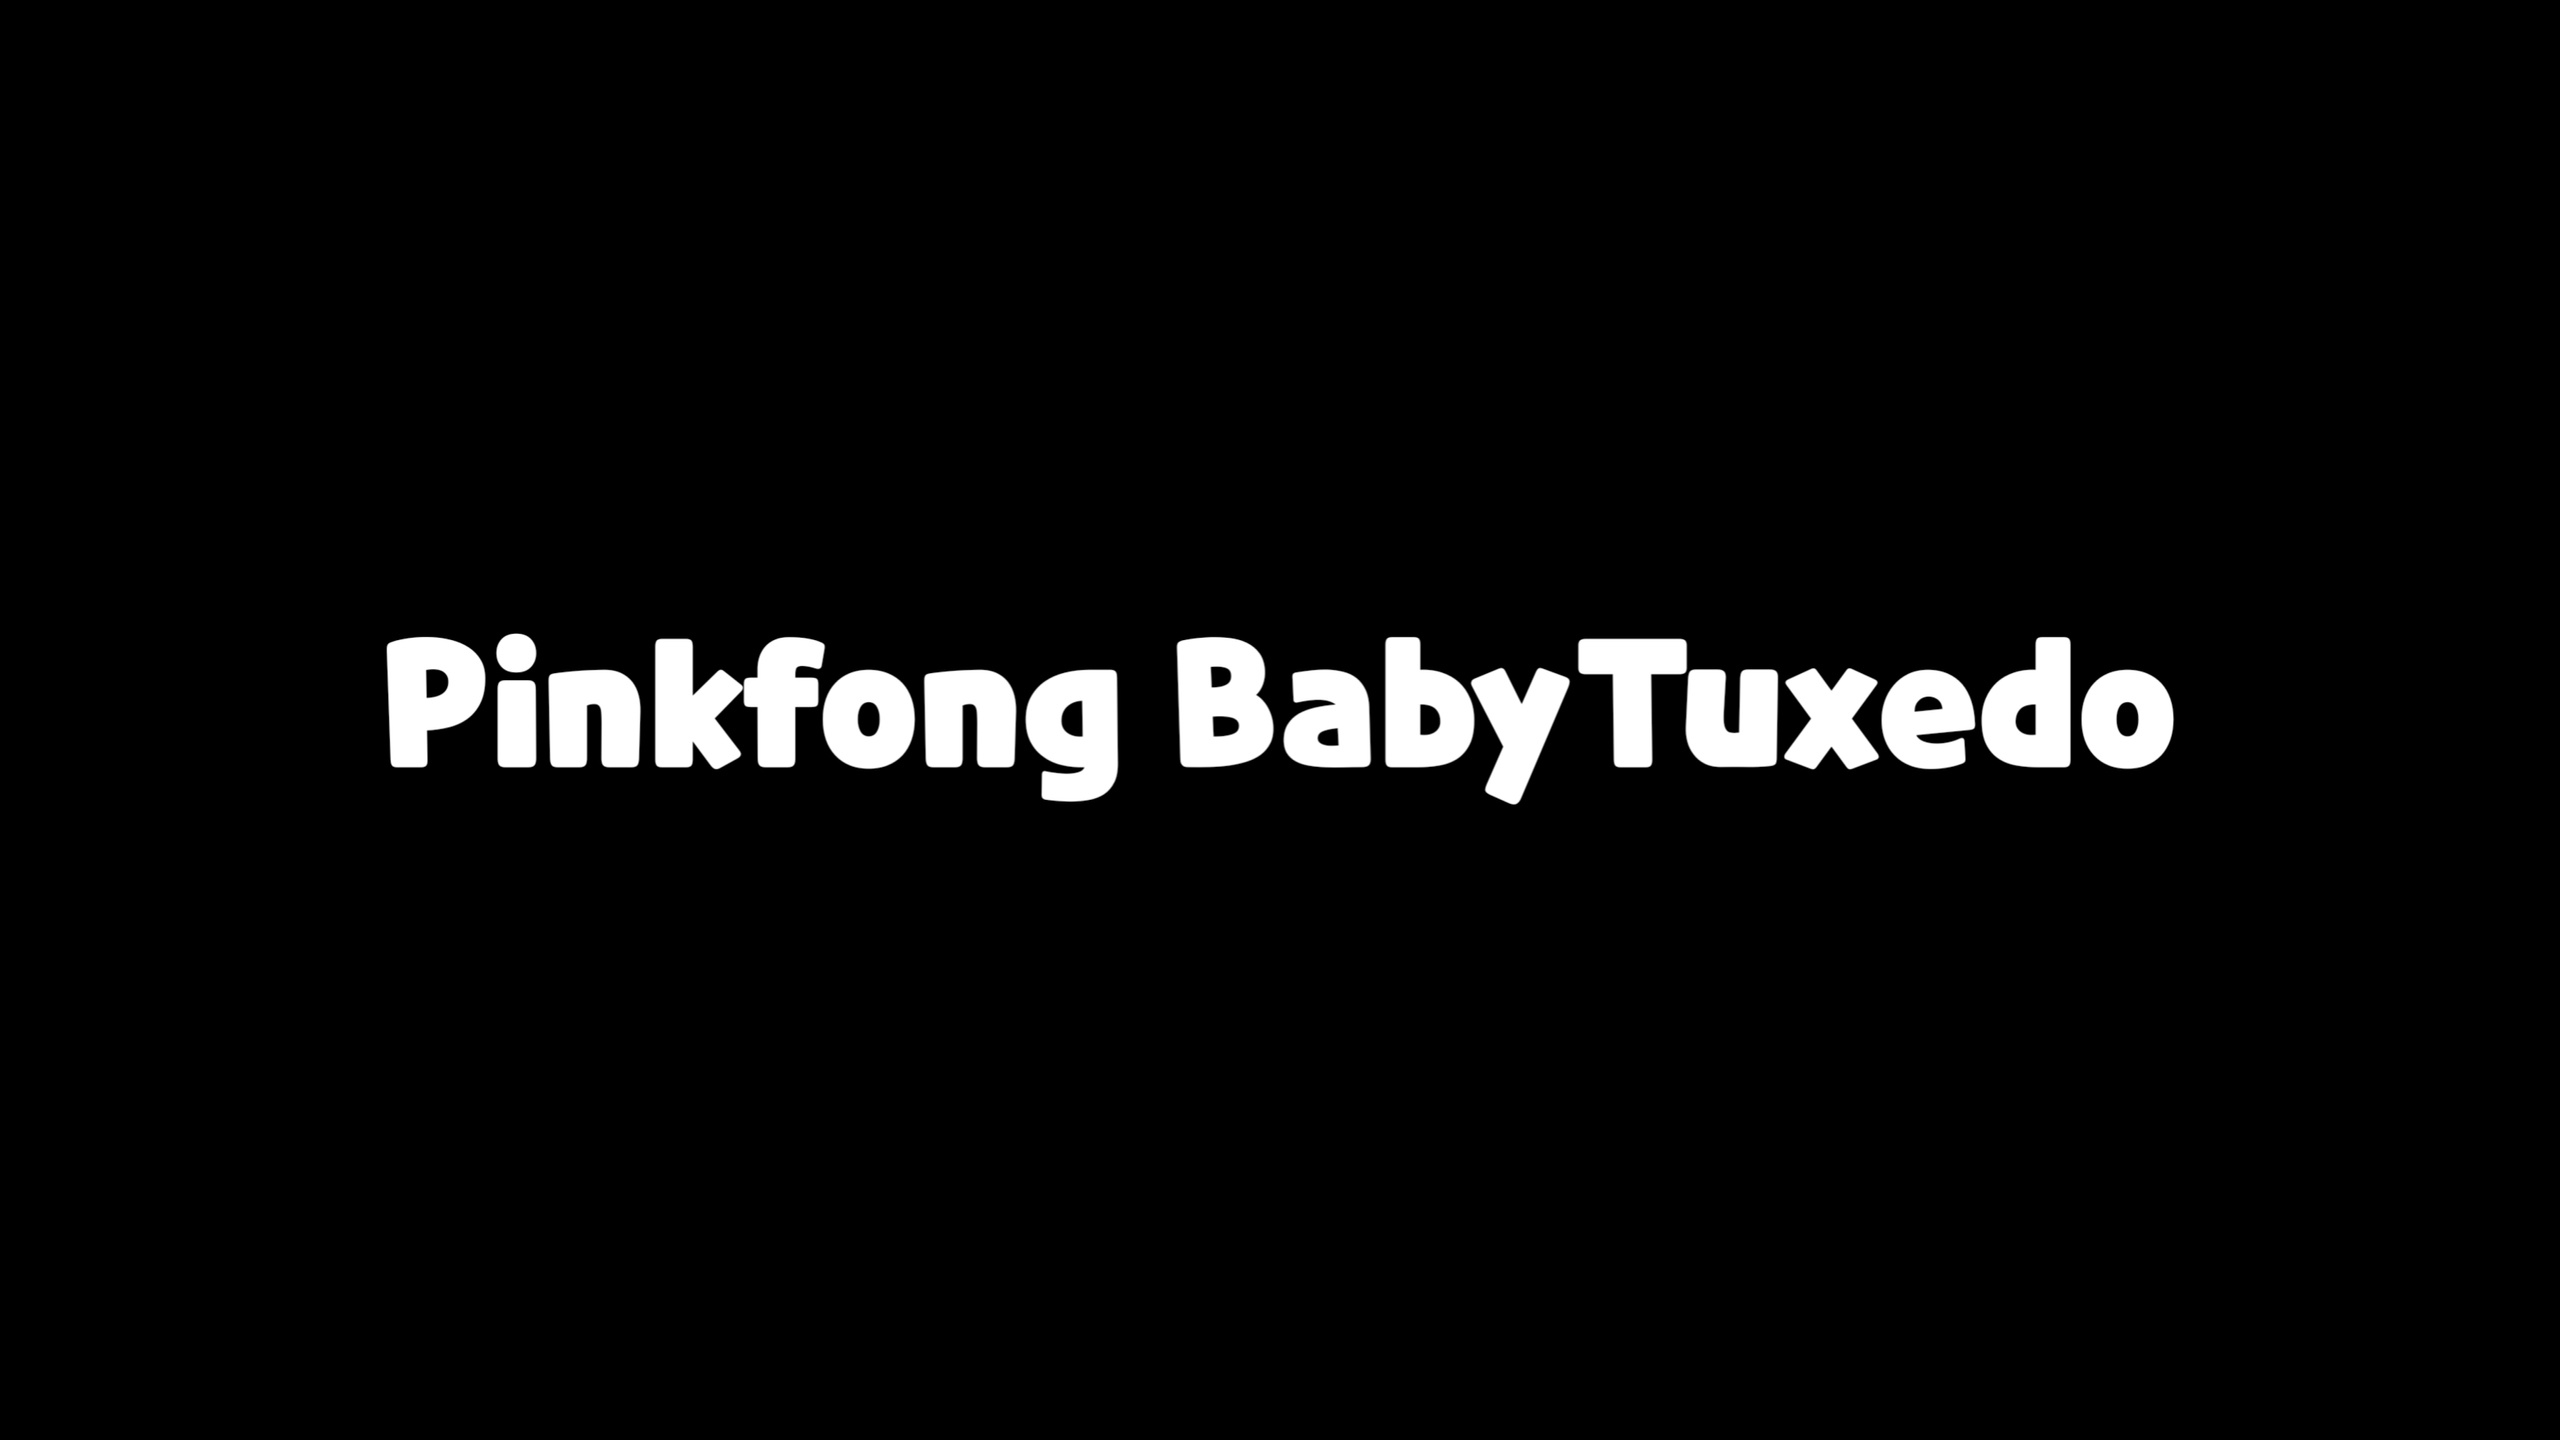 PINKFONG BABYTUXEDO W1GBaby Italic Font preview